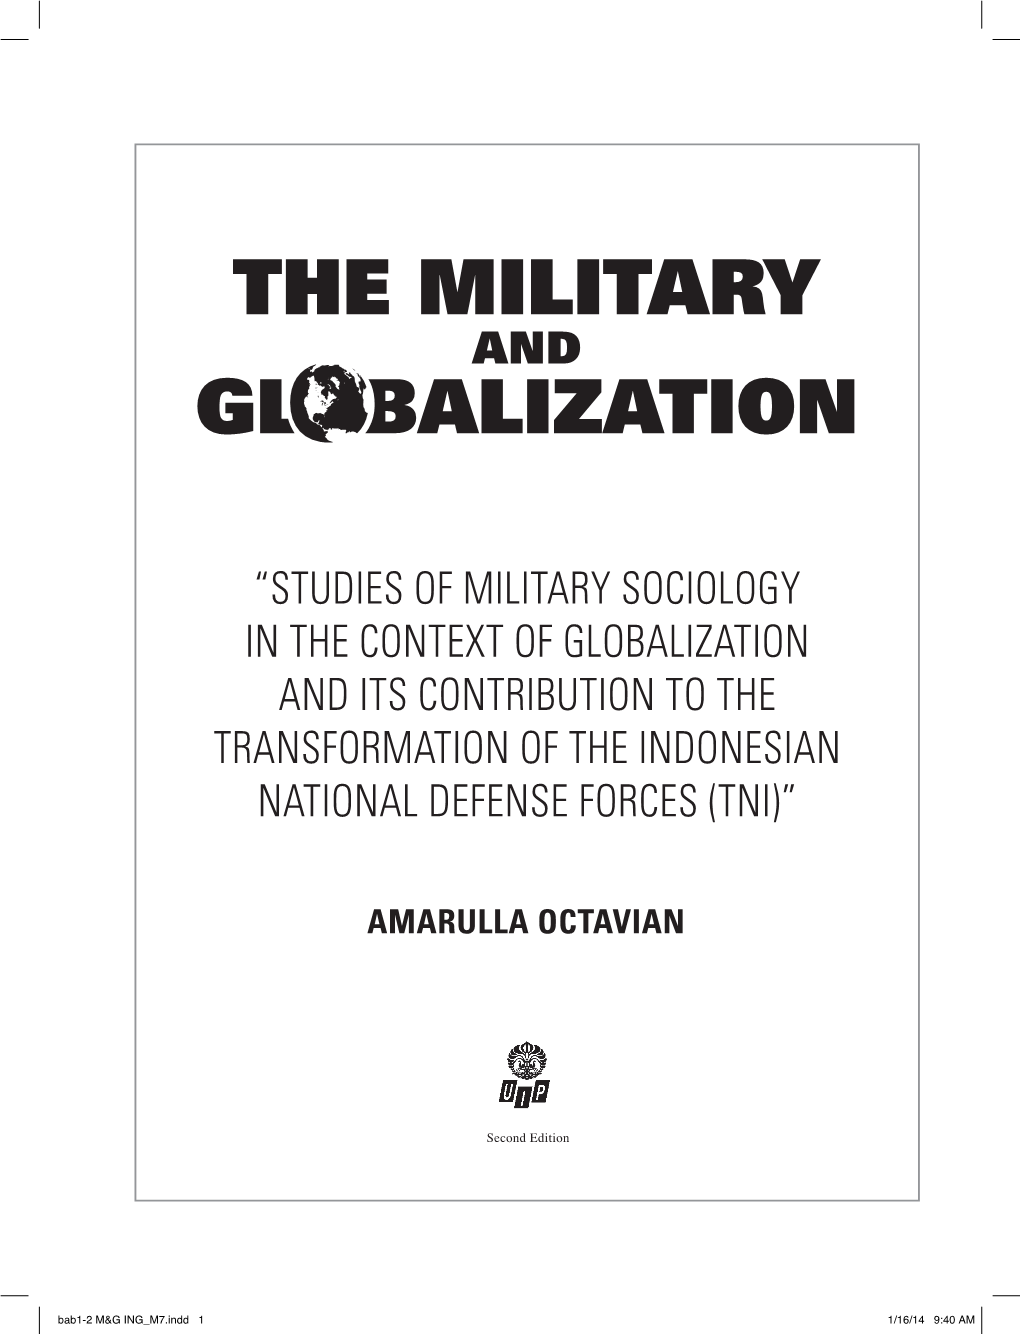 “Studies of Military Sociology in the Context of Globalization and Its Contribution to the Transformation of the Indonesian National Defense Forces (Tni)”